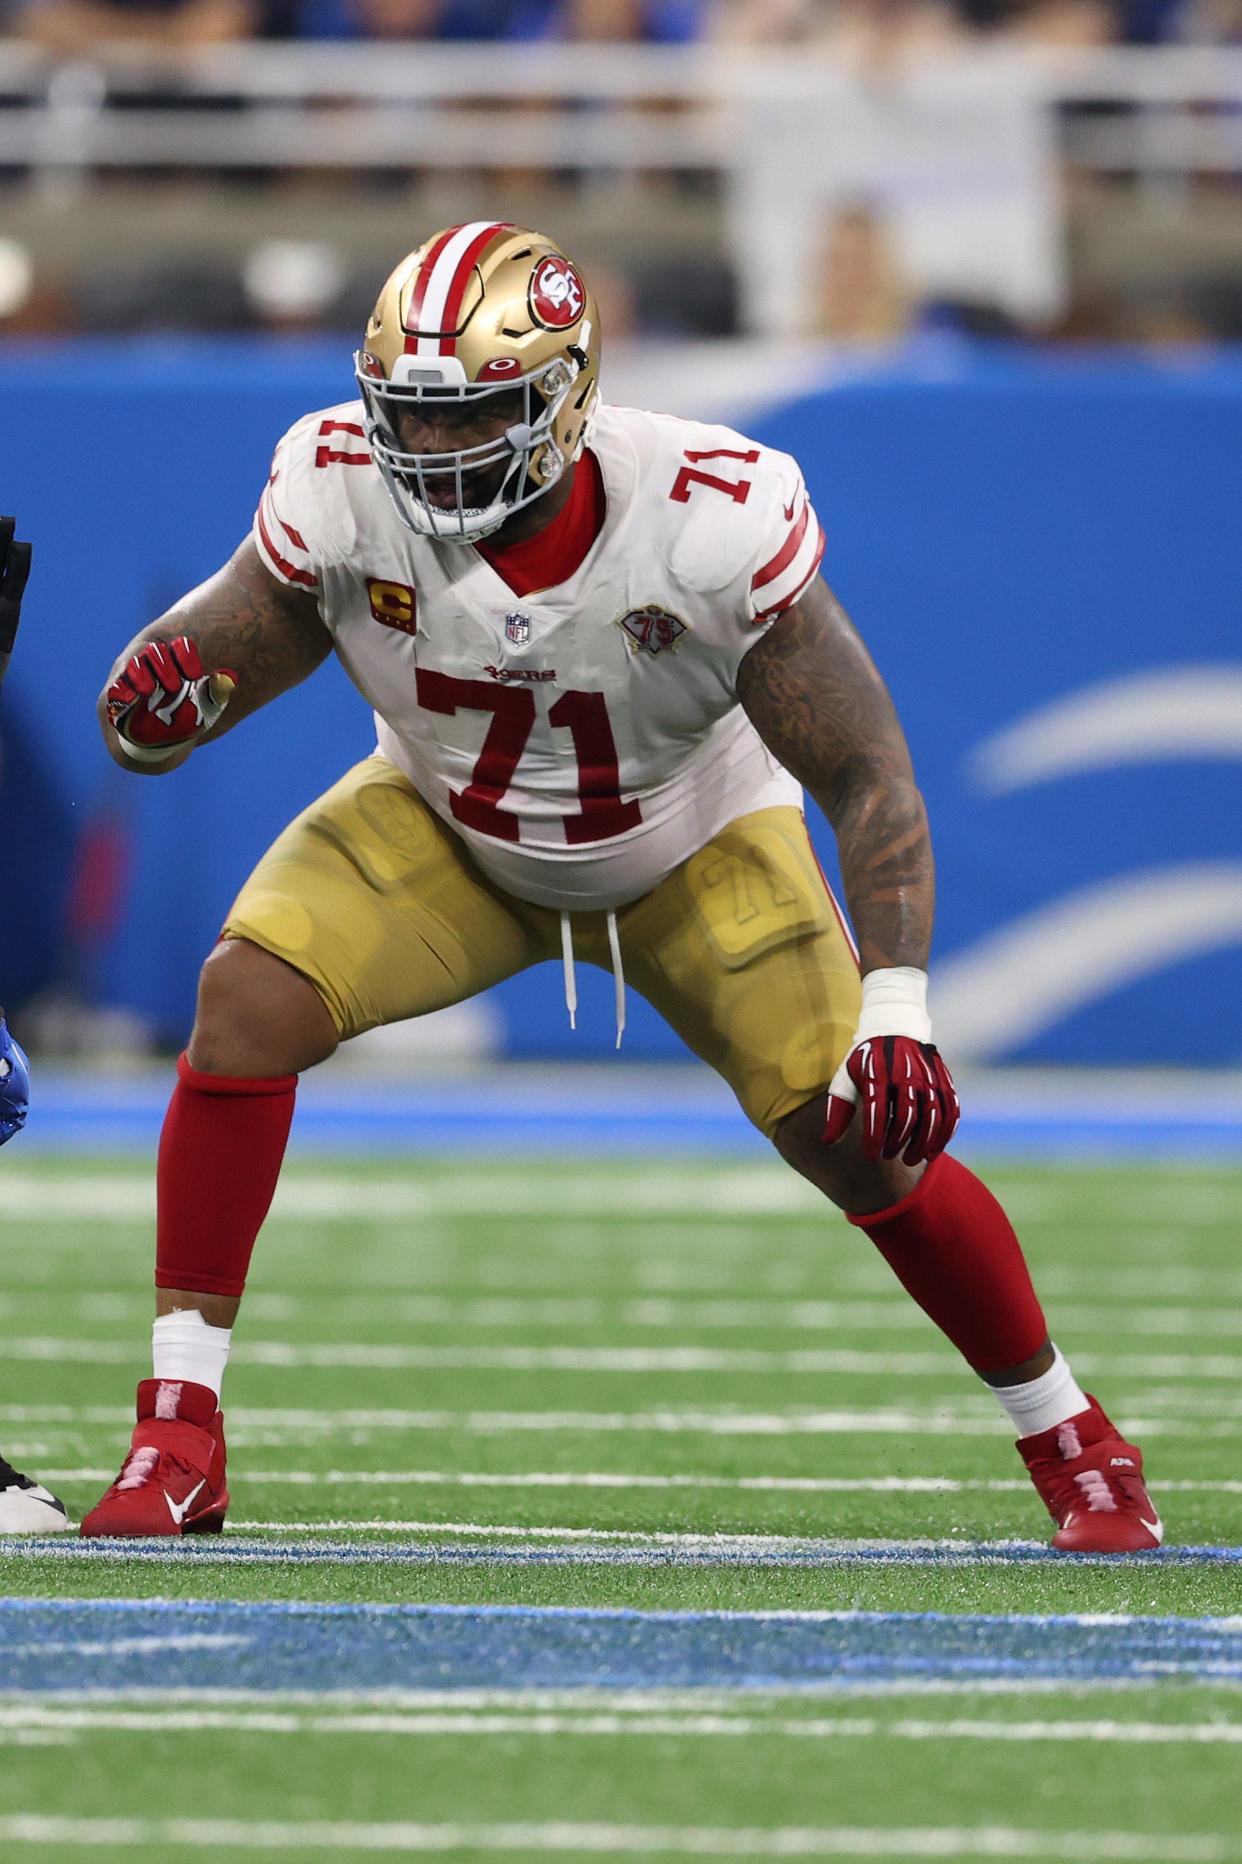 San Francisco 49ers tackle Trent Williams plays against the Detroit Lions at Ford Field on Sept. 12, 2021 in Detroit.